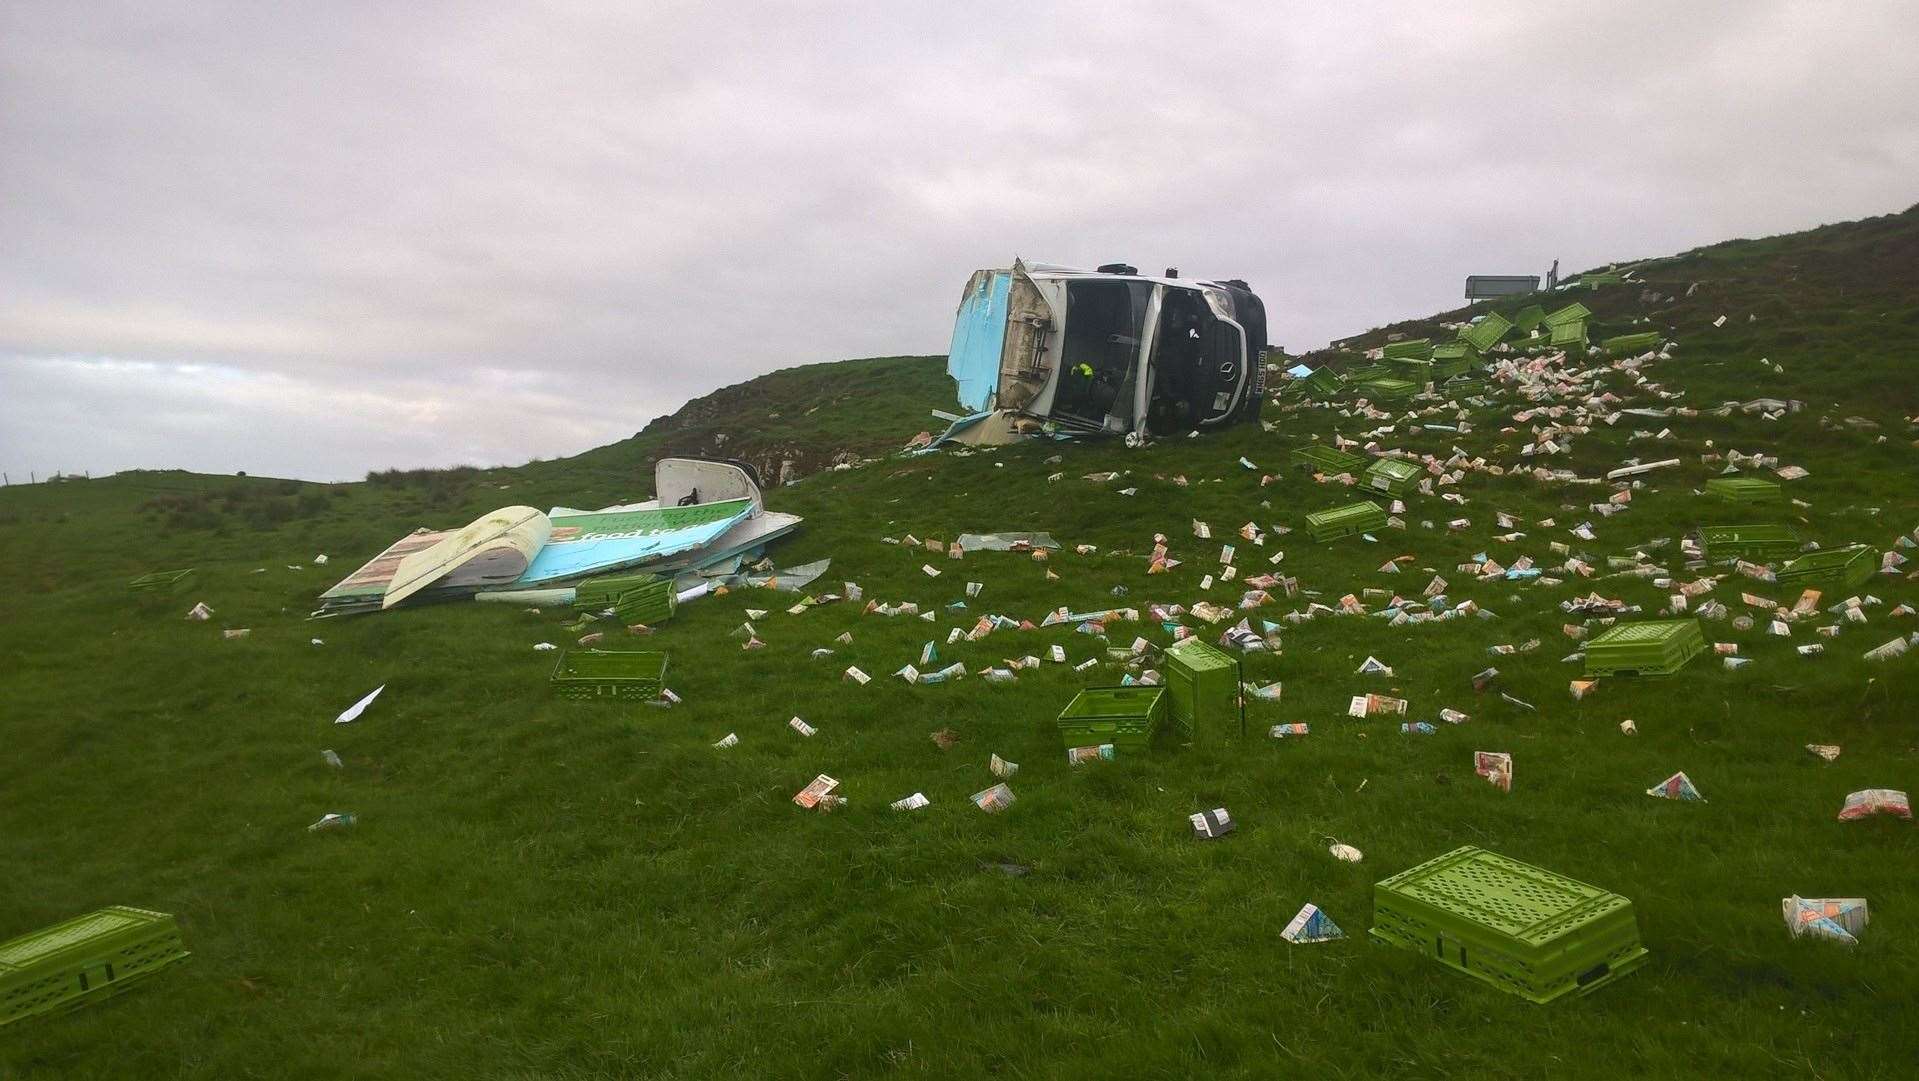 Debris scattered across the field after the sandwich van crashed early on Friday.